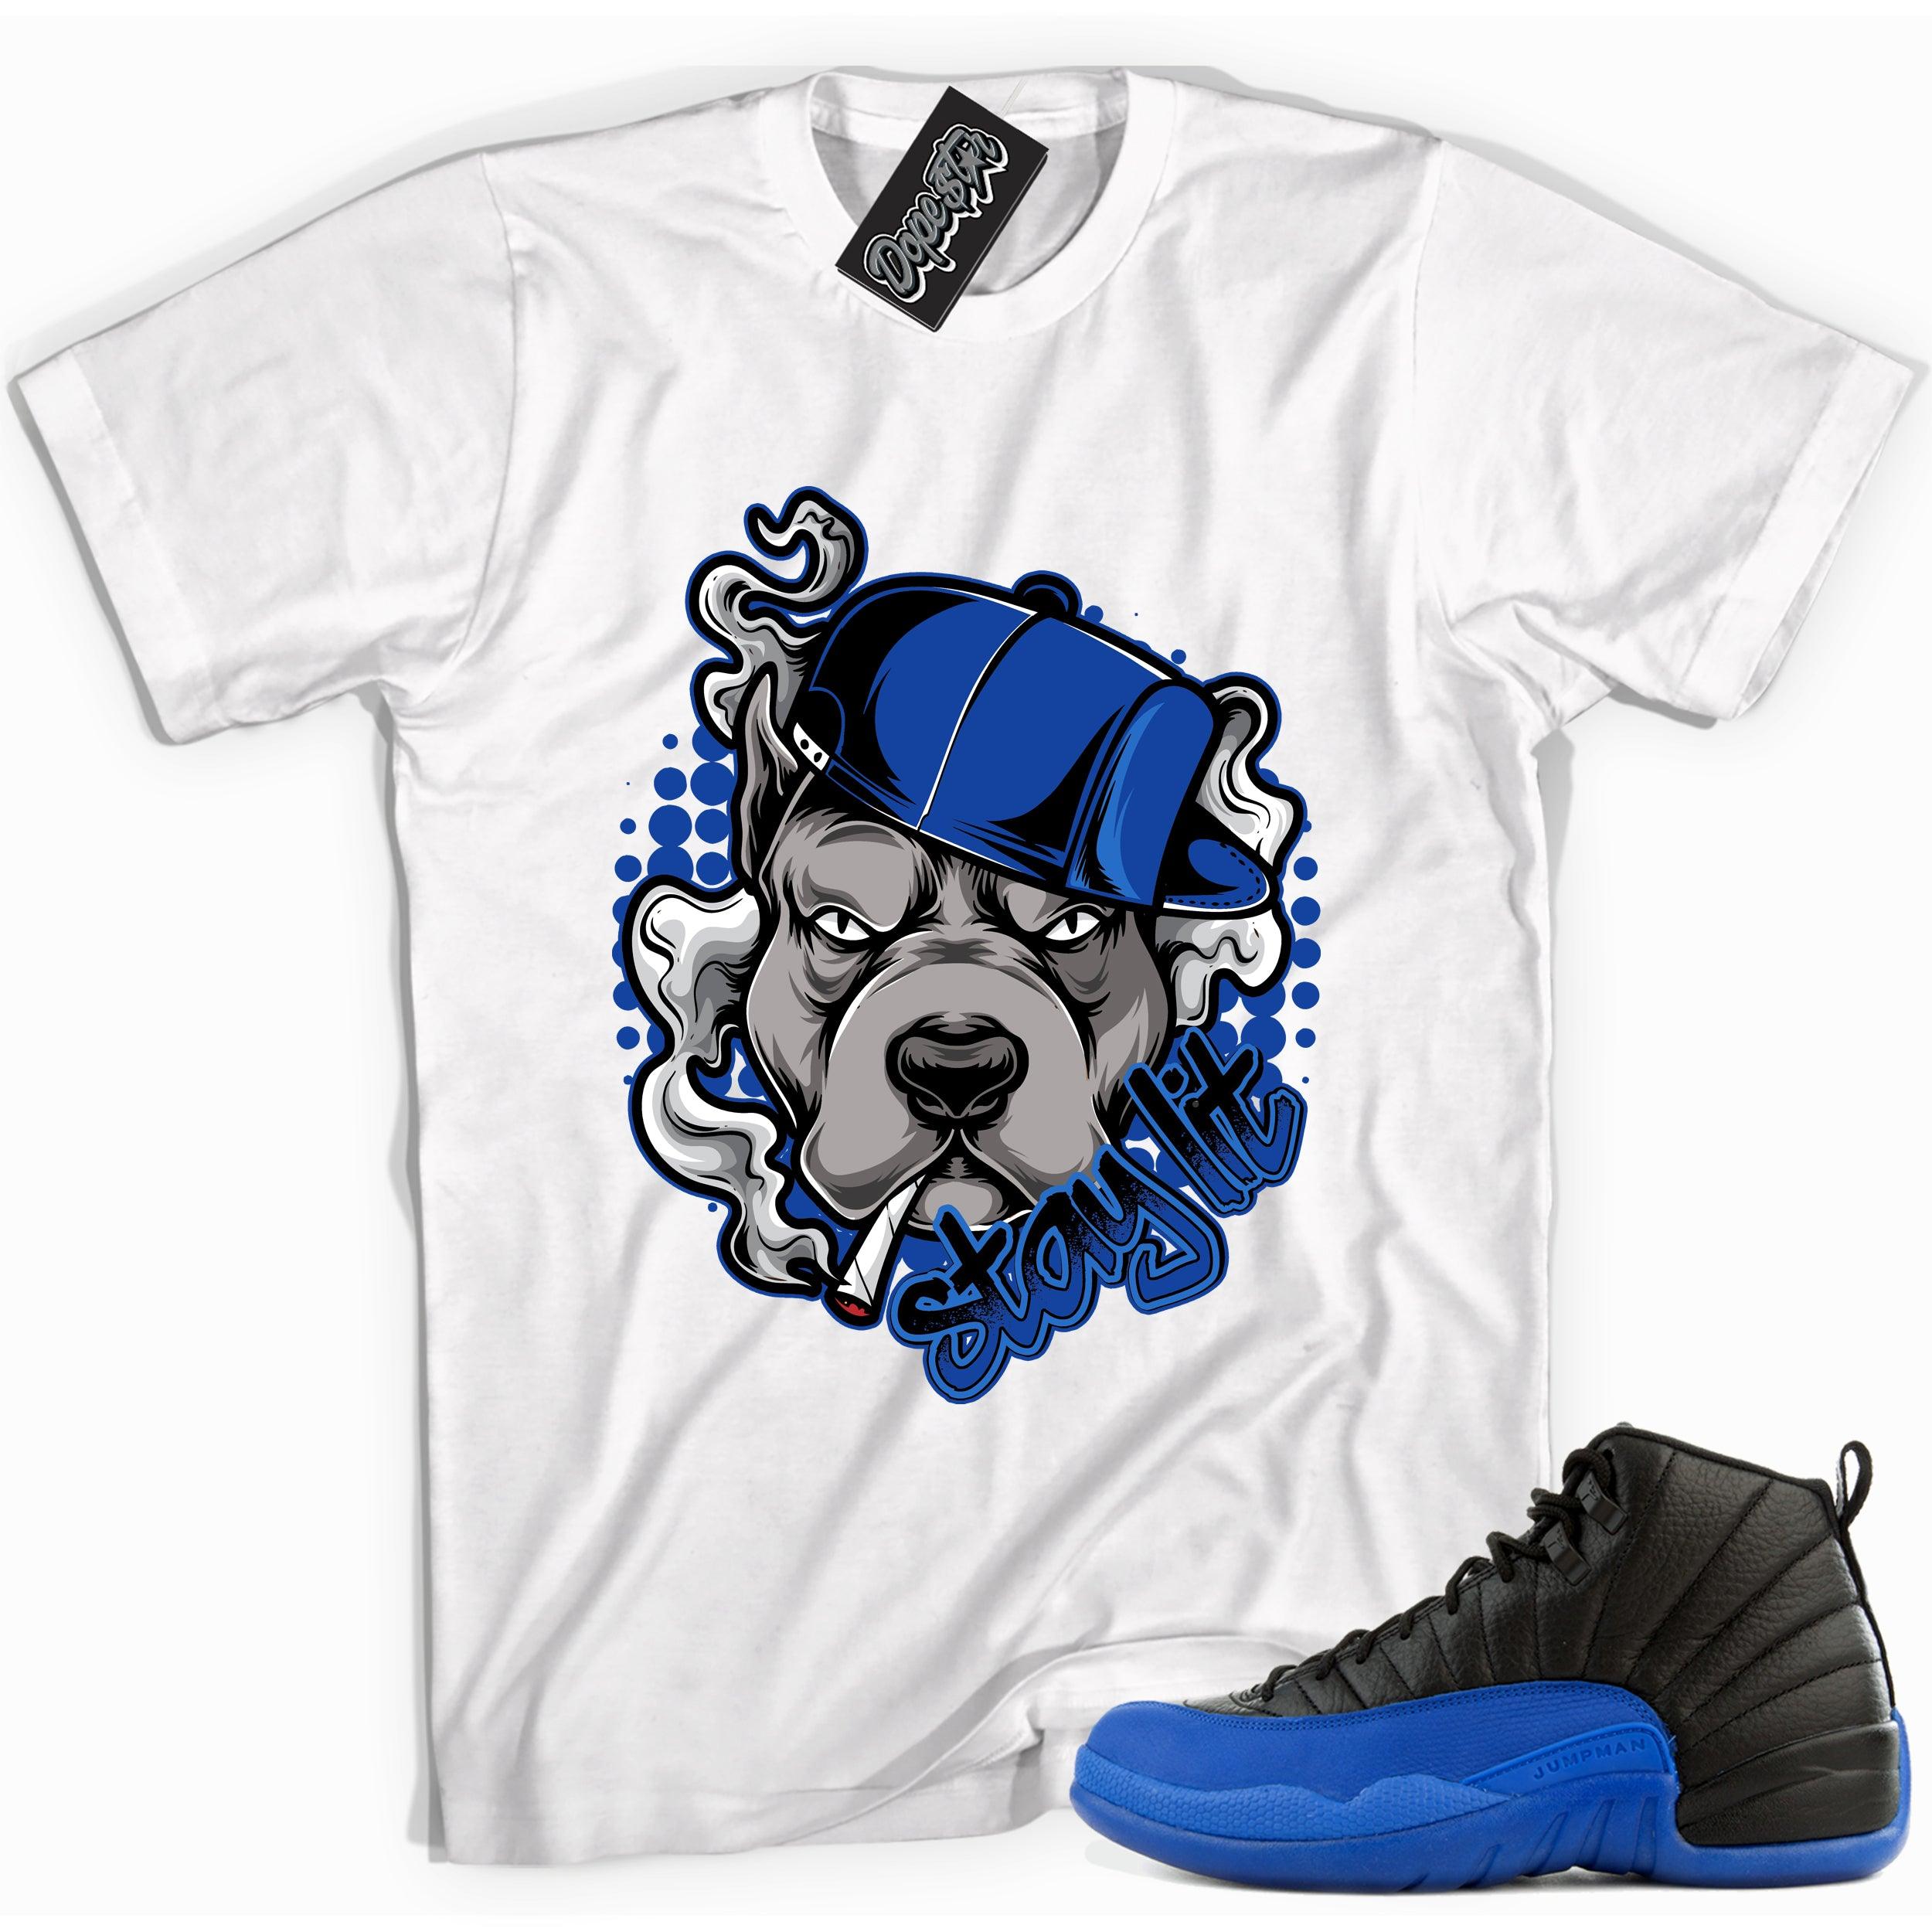 Cool white graphic tee with 'stay lit' print, that perfectly matches Air Jordan 12 Retro Black Game Royal sneakers.